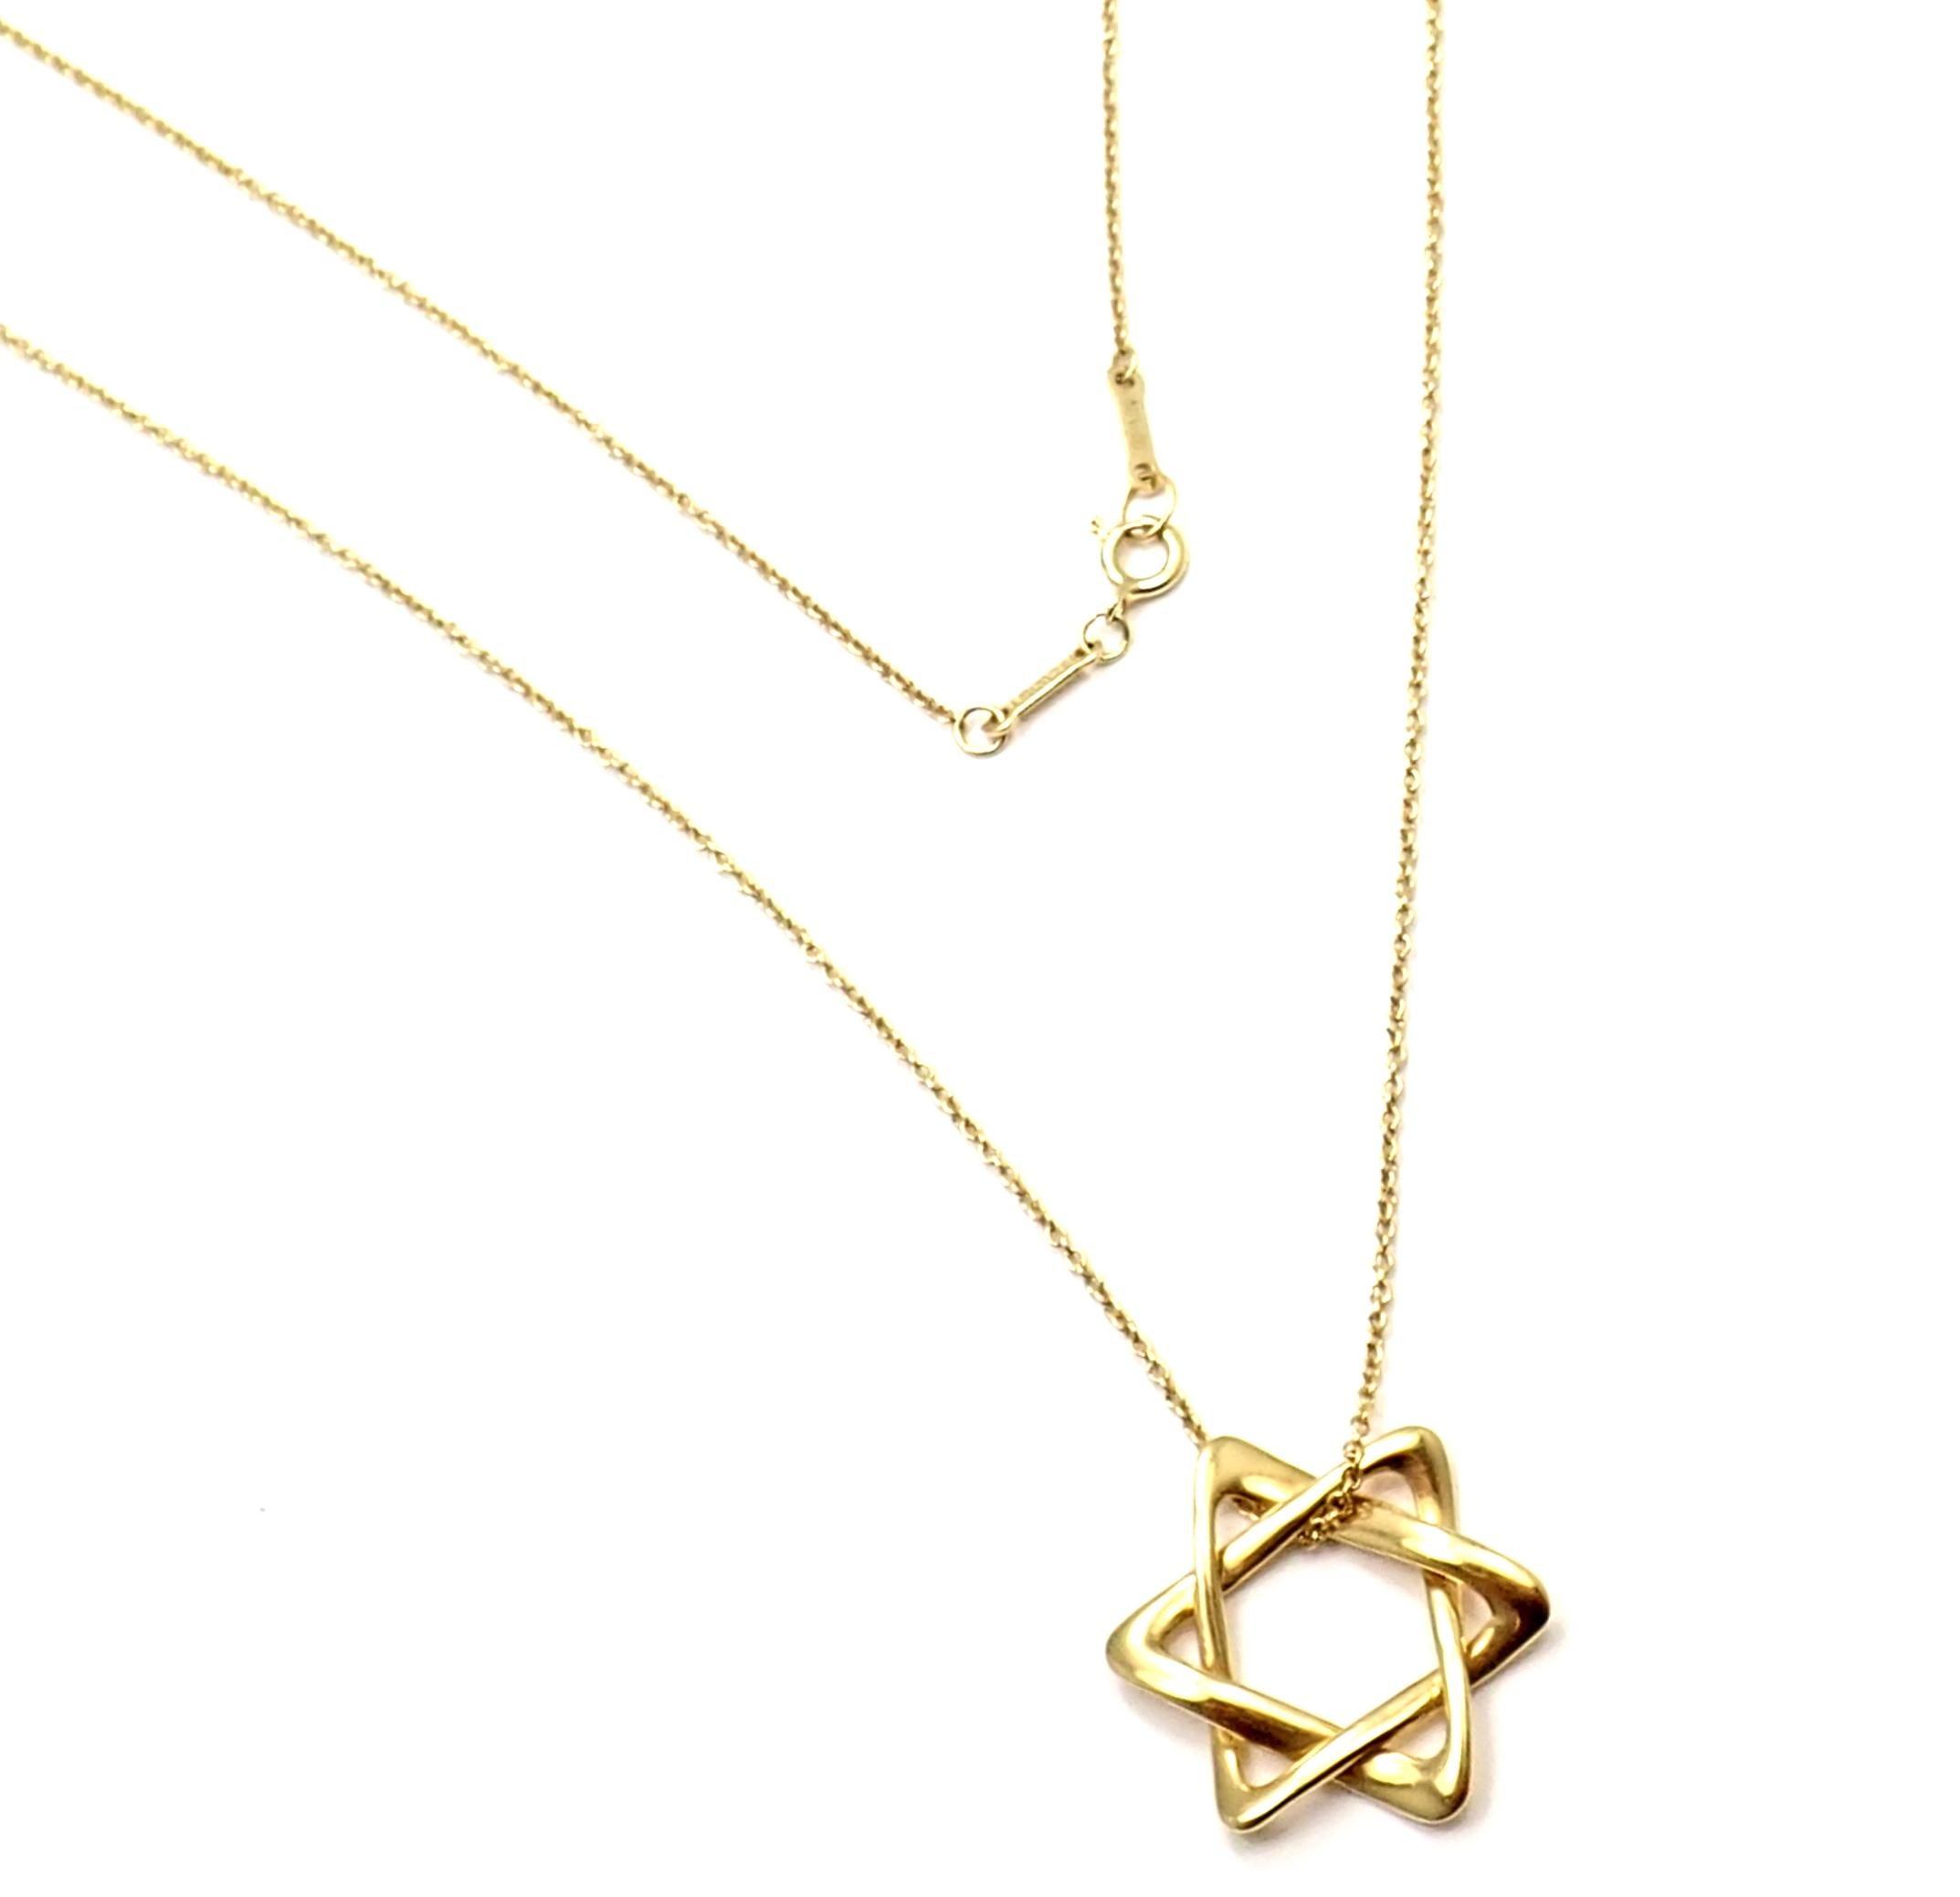 18k Yellow Gold Star Of David Pendant Necklace by Elsa Peretti for Tiffany & Co.
Details:
Length: 24.5